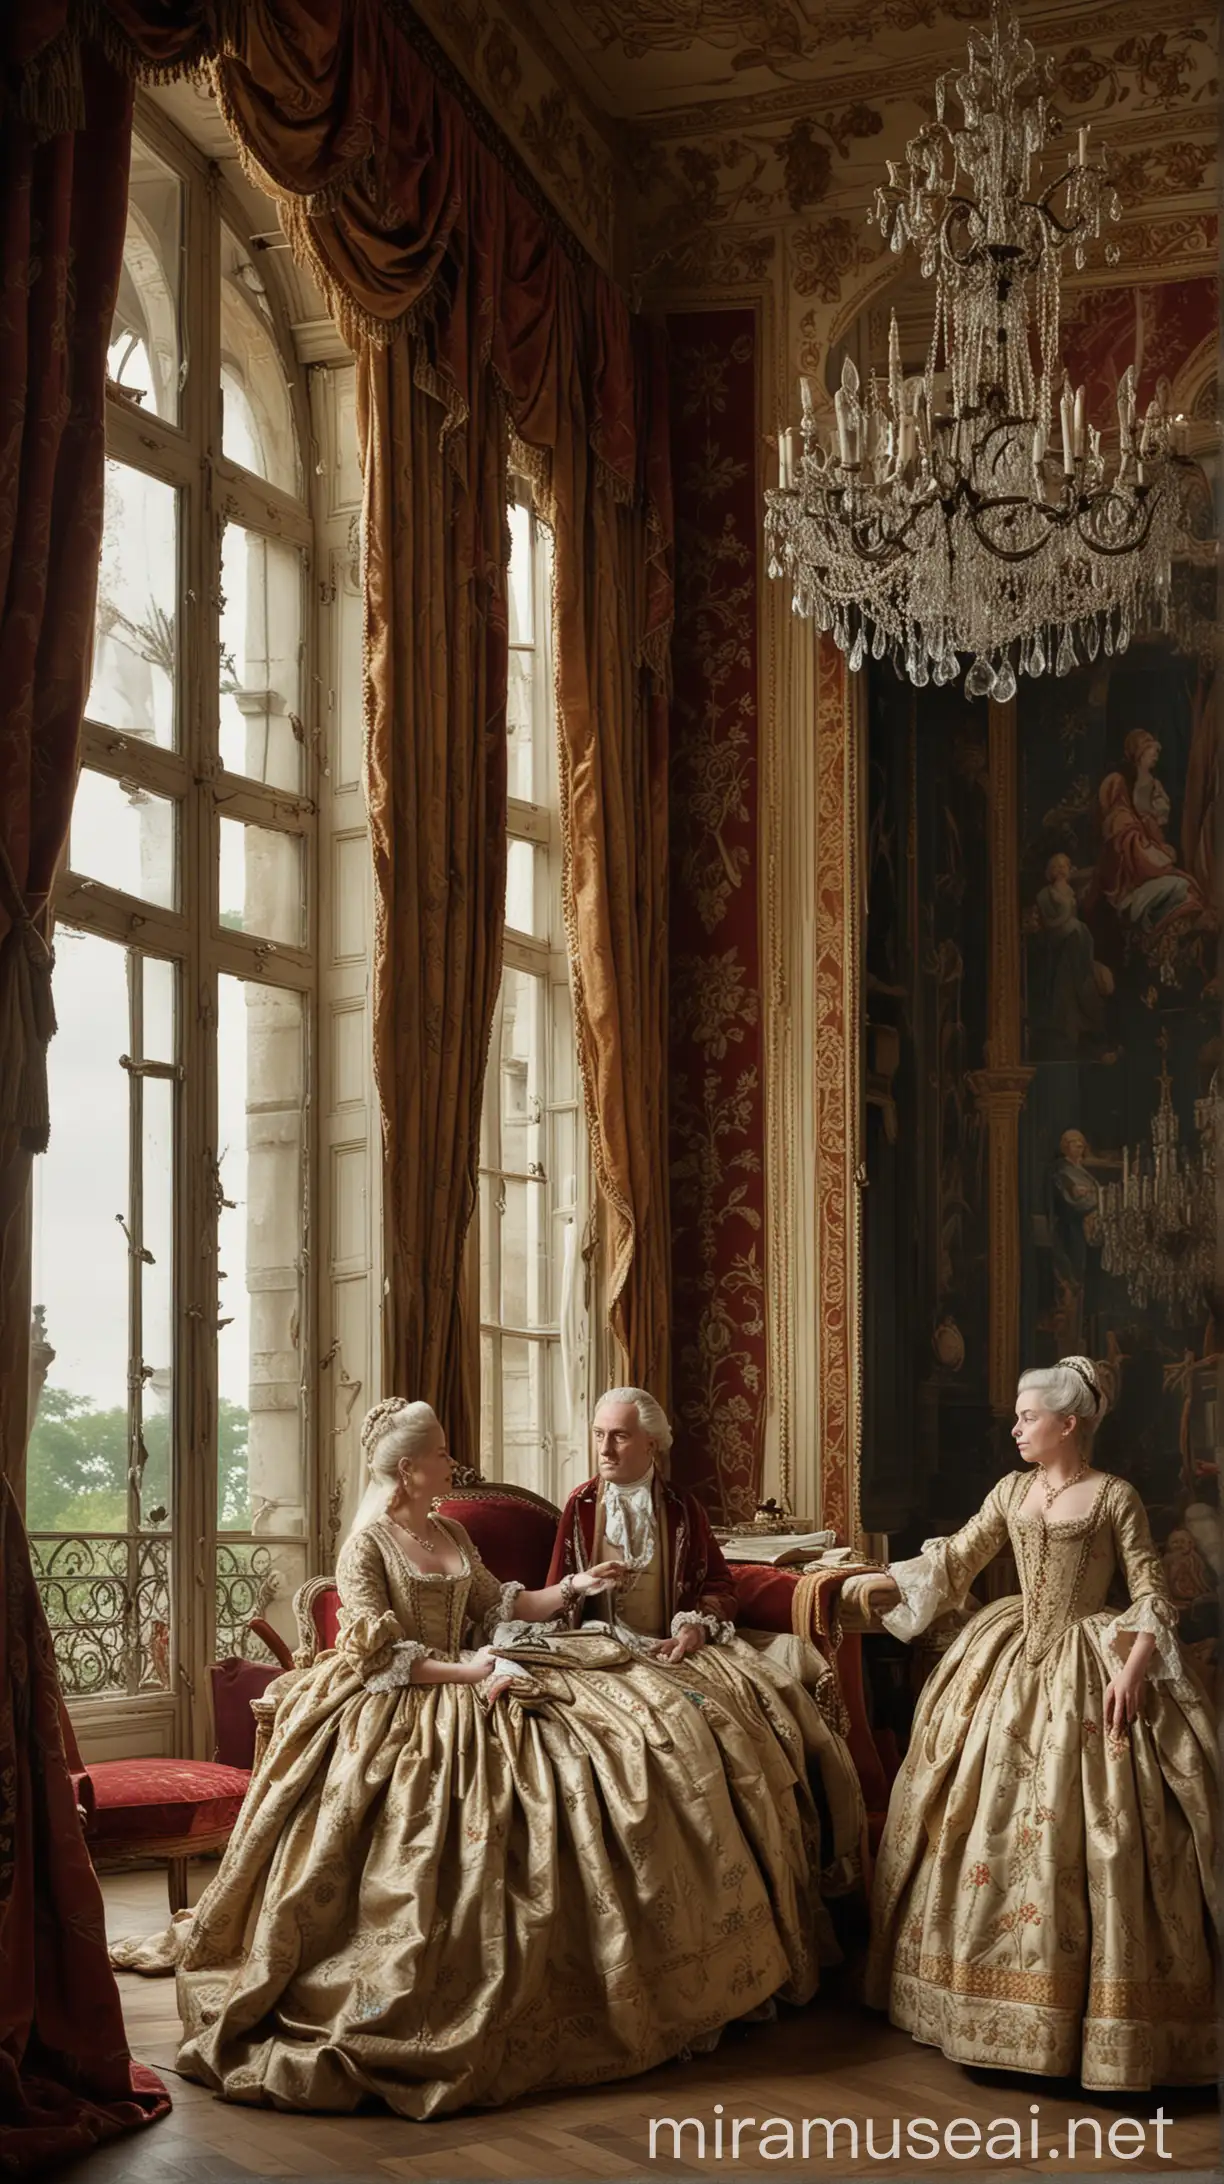 In an opulent French palace, King Louis XVI is seen in an elegant room decorated with lavish furnishings and intricate tapestries. He appears distressed, consulting with a royal physician about his condition of phimosis. Nearby, Marie Antoinette stands by a large window, looking concerned yet supportive. The scene is set in the late 18th century, with ornate chandeliers and rich, velvet drapes.
